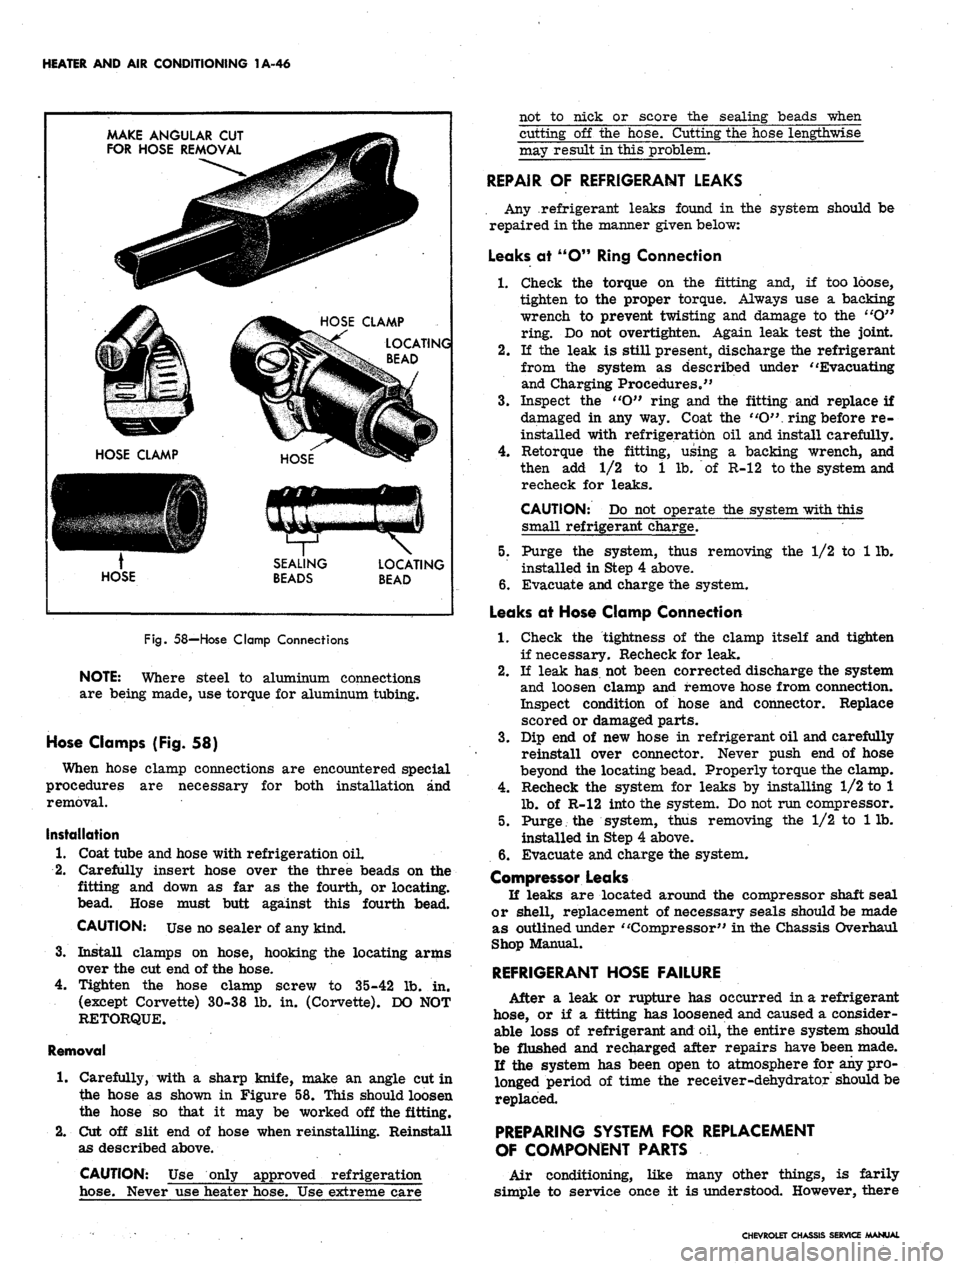 CHEVROLET CAMARO 1967 1.G Chassis Workshop Manual 
HEATER AND AIR CONDITIONING 1A-46

MAKE ANGULAR CUT

FOR HOSE REMOVAL

LOCATING

BEAD

SEALING

BEADS 
LOCATING

BEAD 
not to nick or score the sealing beads when

cutting off the hose. Cutting the h